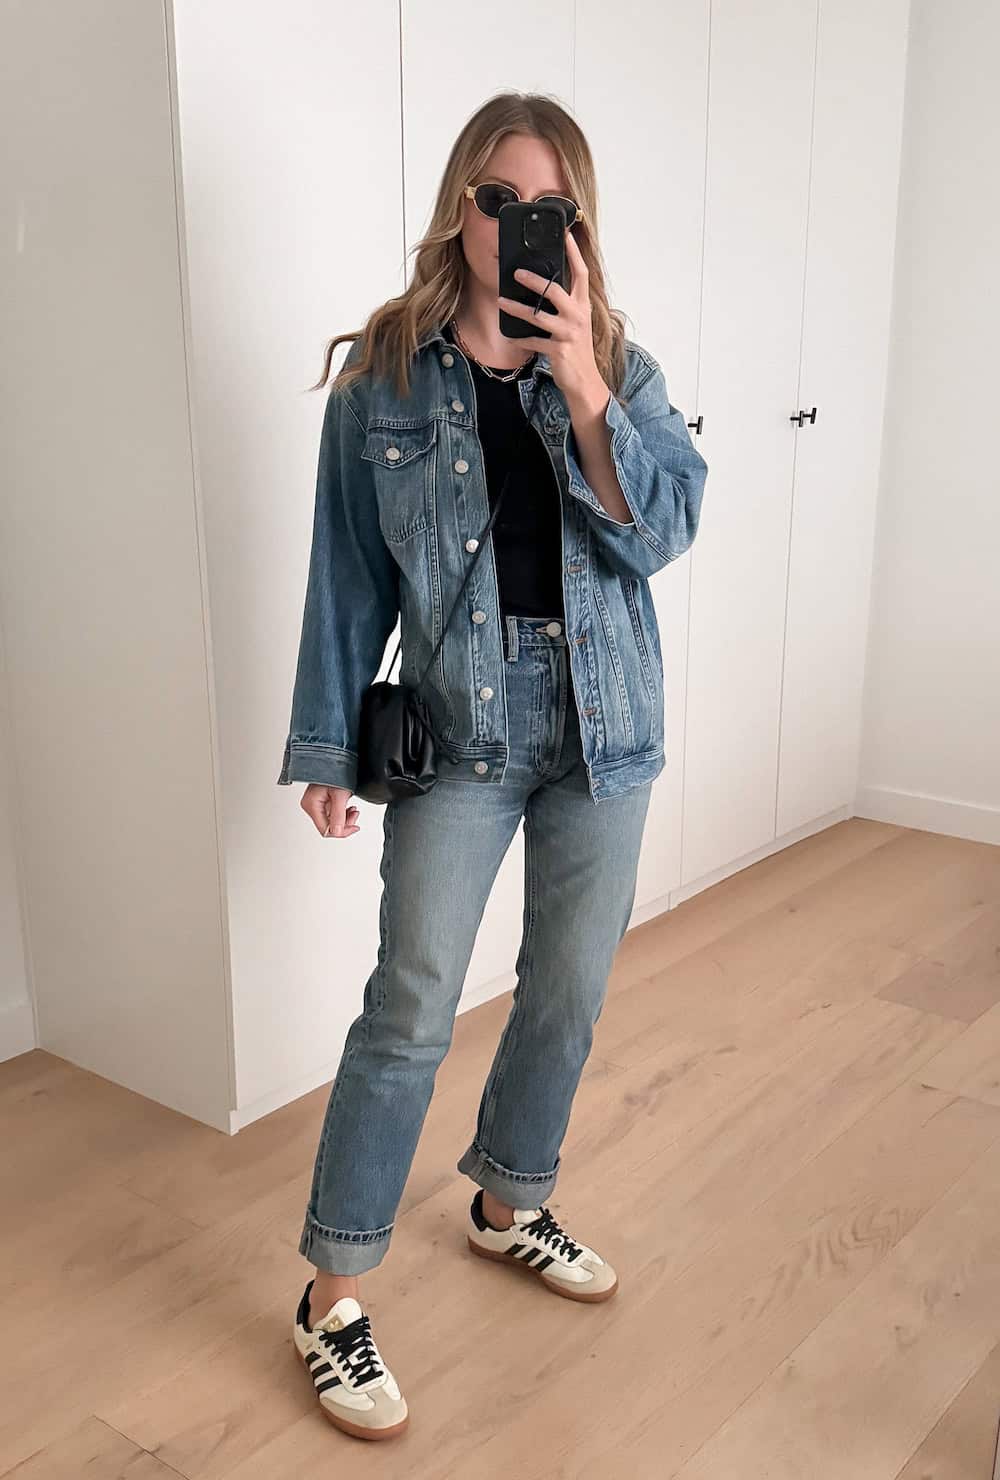 Christal wearing jeans with a matching denim jacket and a black t-shirt with sneakers.